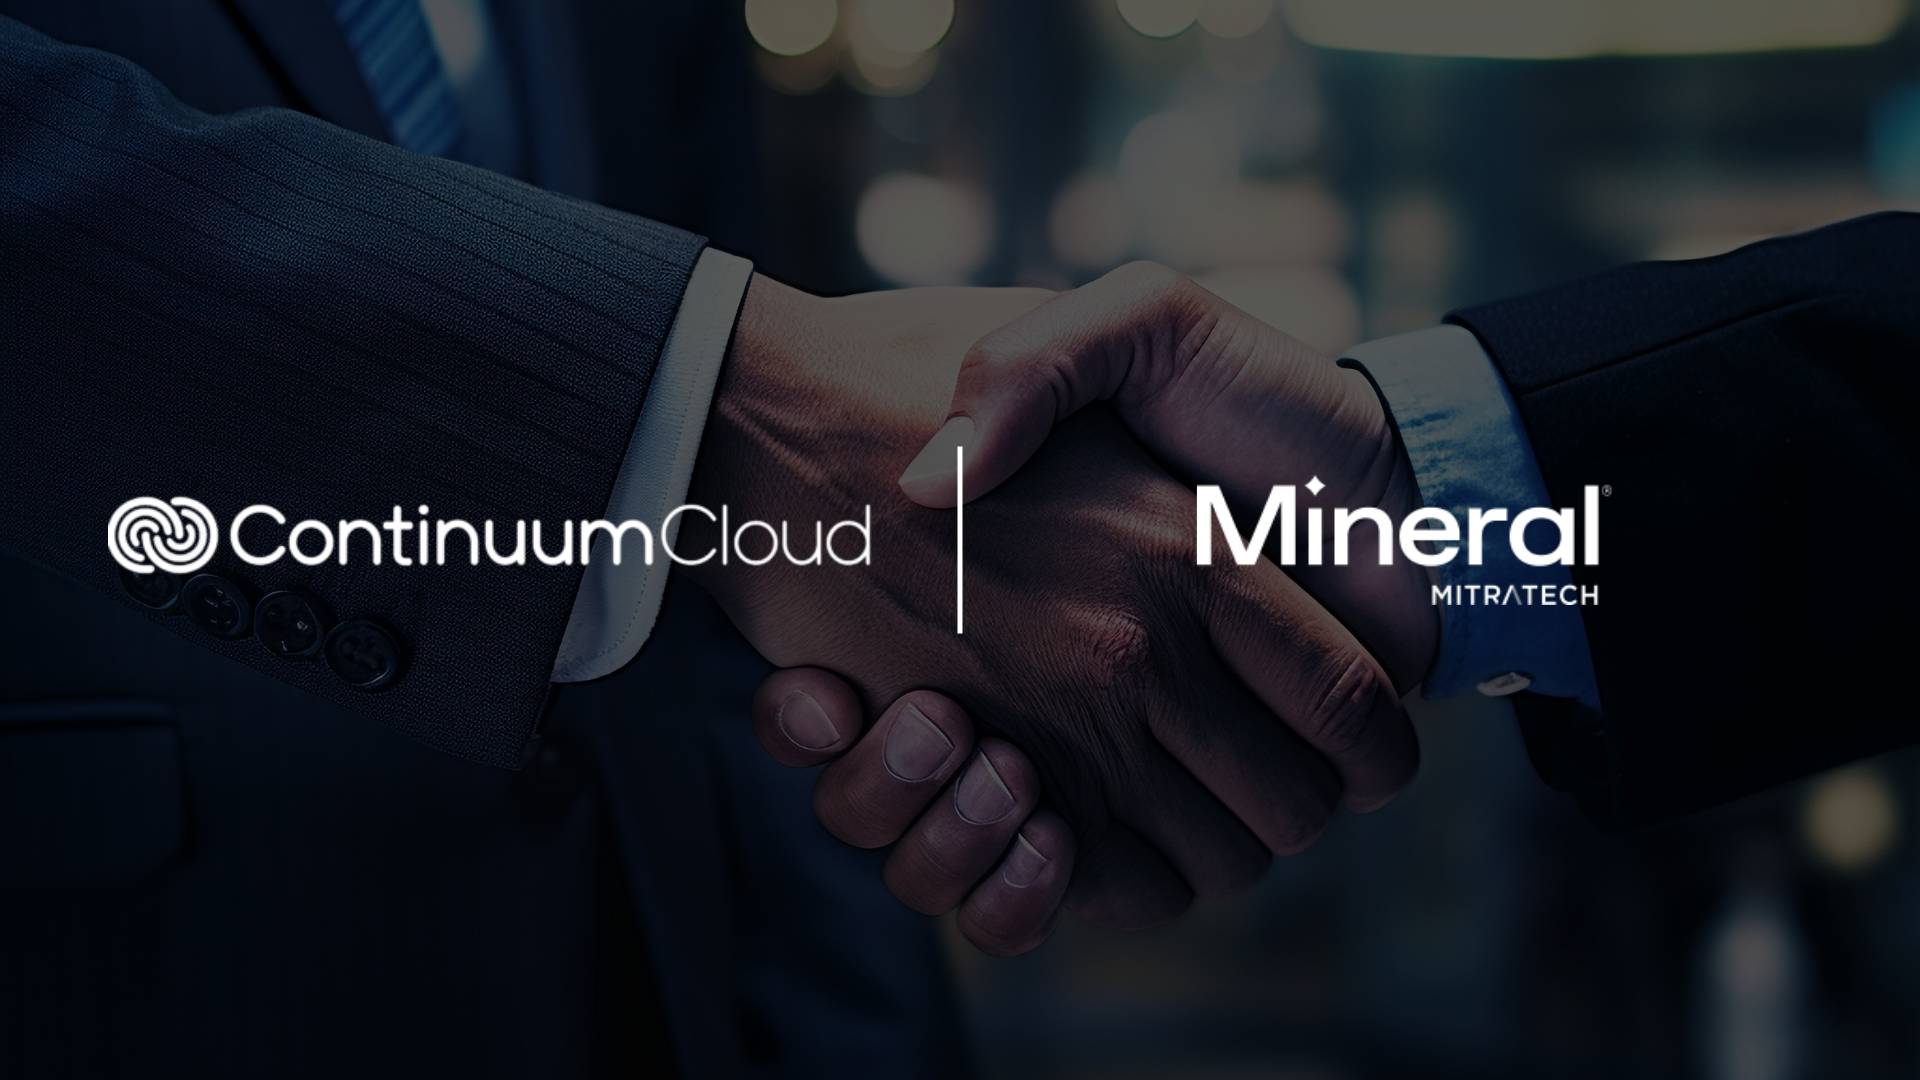 Mineral and ContinuumCloud Collaborate to Enhance HR Compliance Solutions for Behavioral Health Organizations